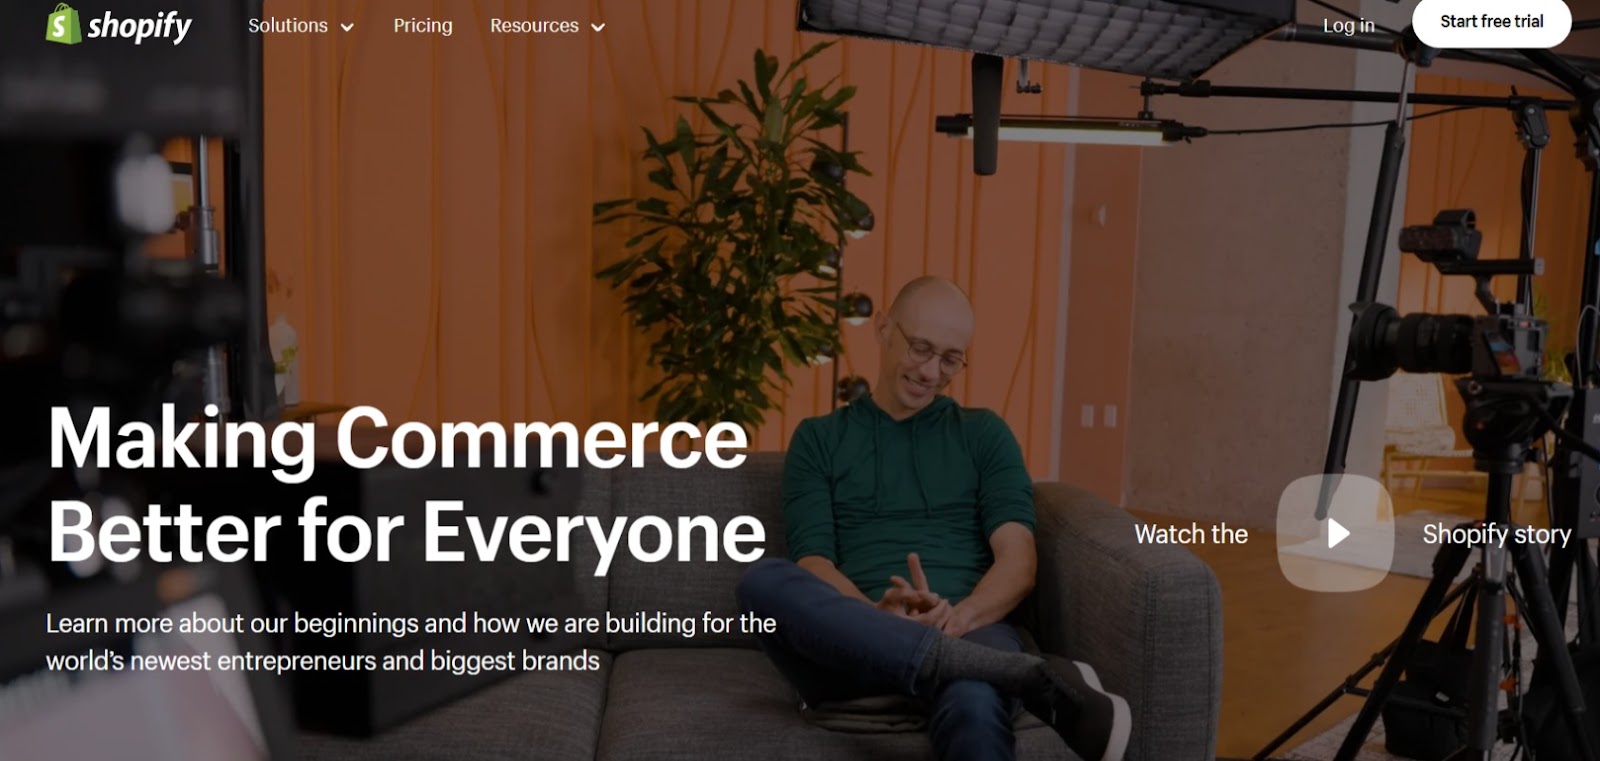 e-commerce website with Shopify